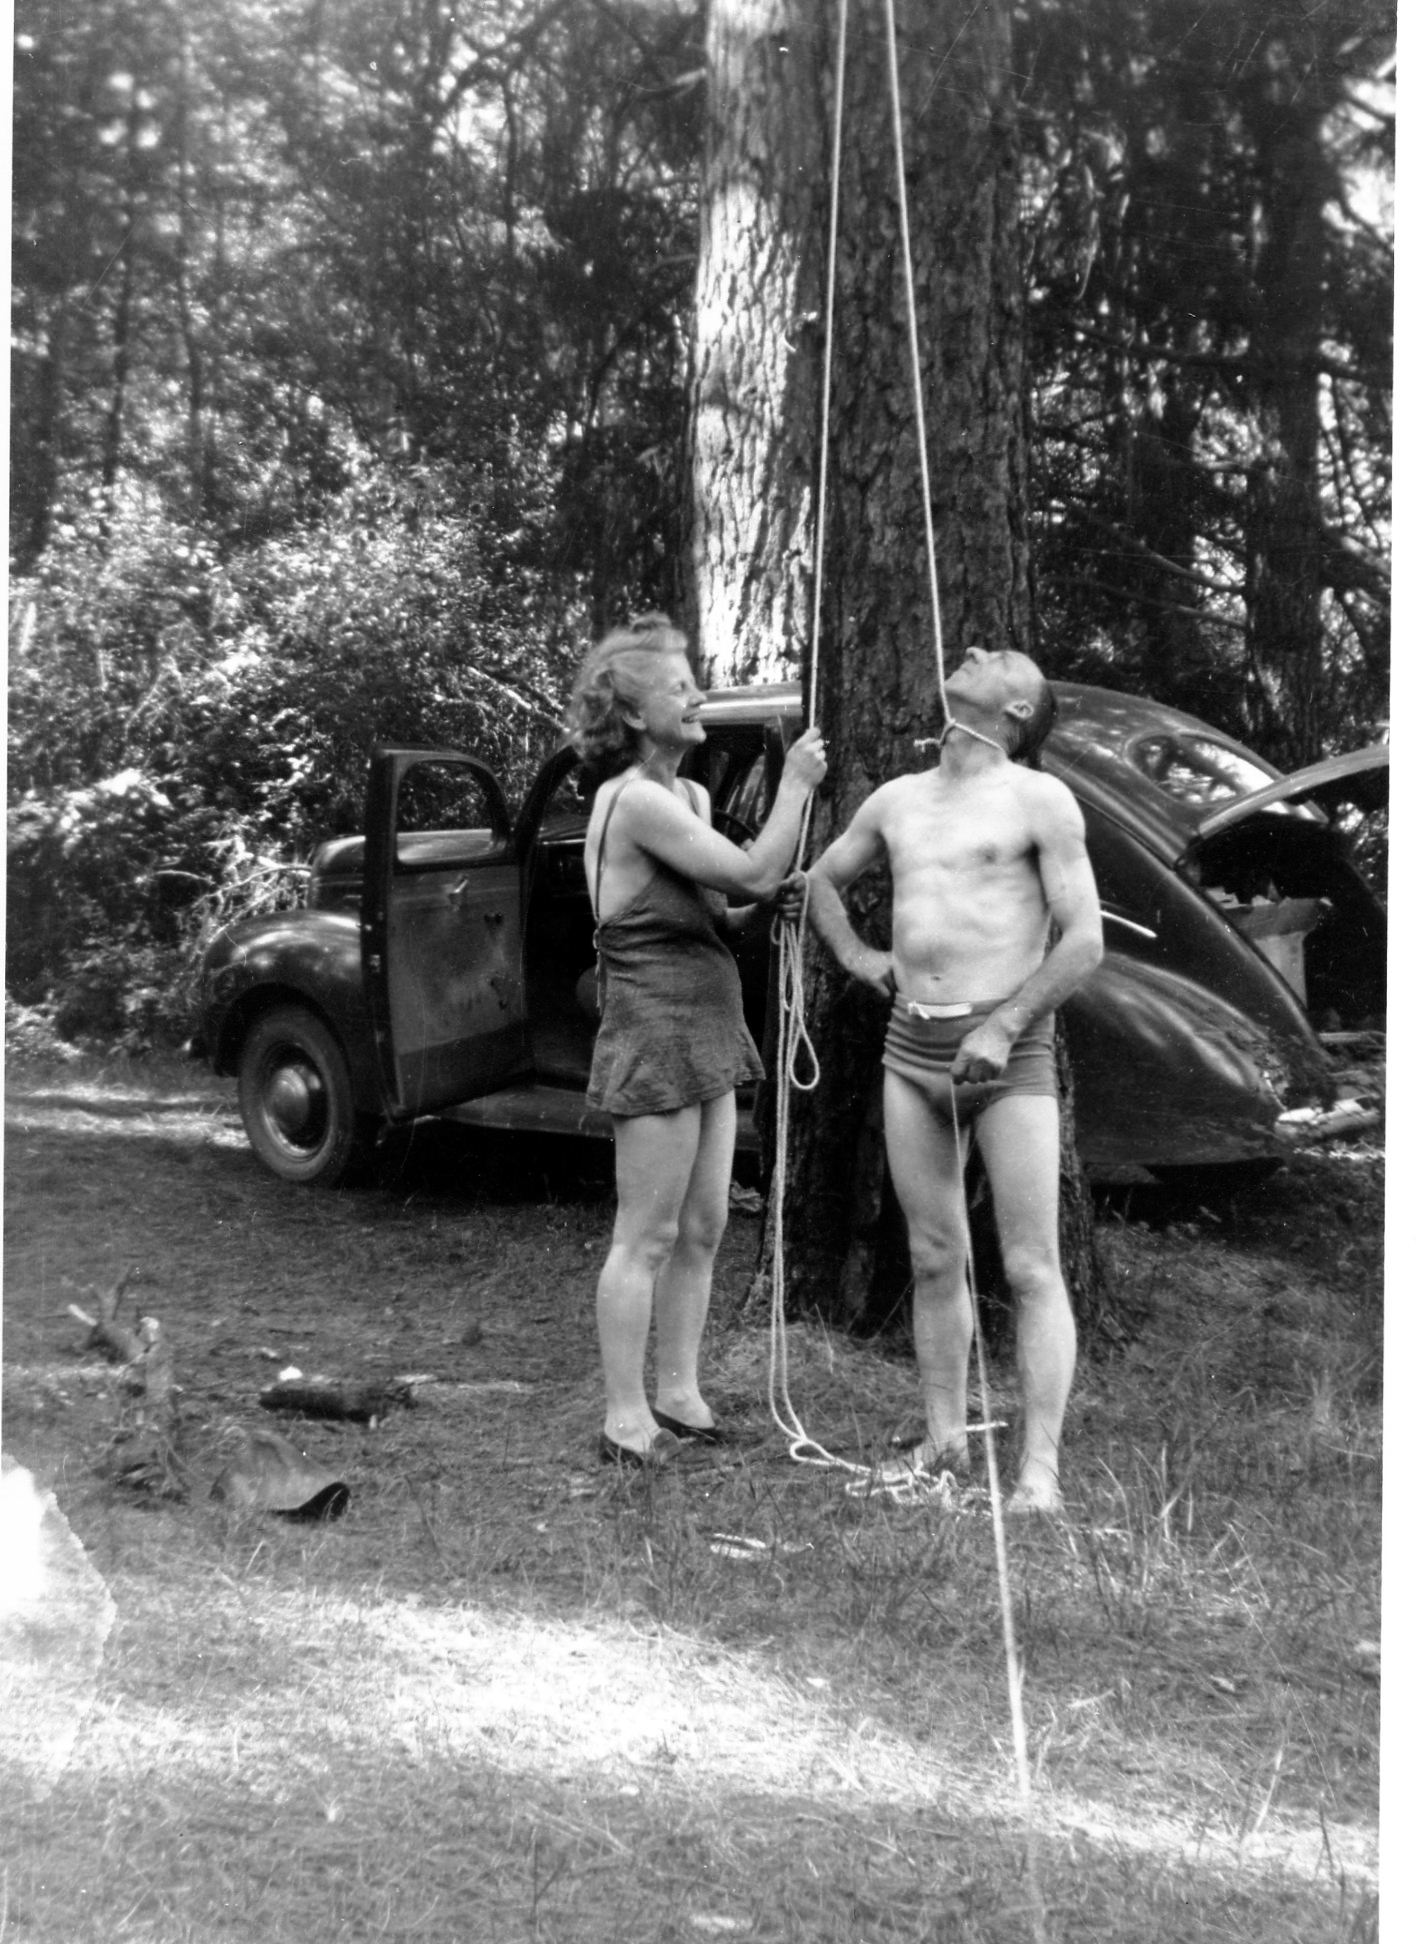 Winnie and Tom Boothby. Judging from their ages, I'd say this is the early 1940s, perhaps someone who knows cars can be more accurate than that. They went camping a lot. They are just being silly. This is probably somewhere in Oregon.